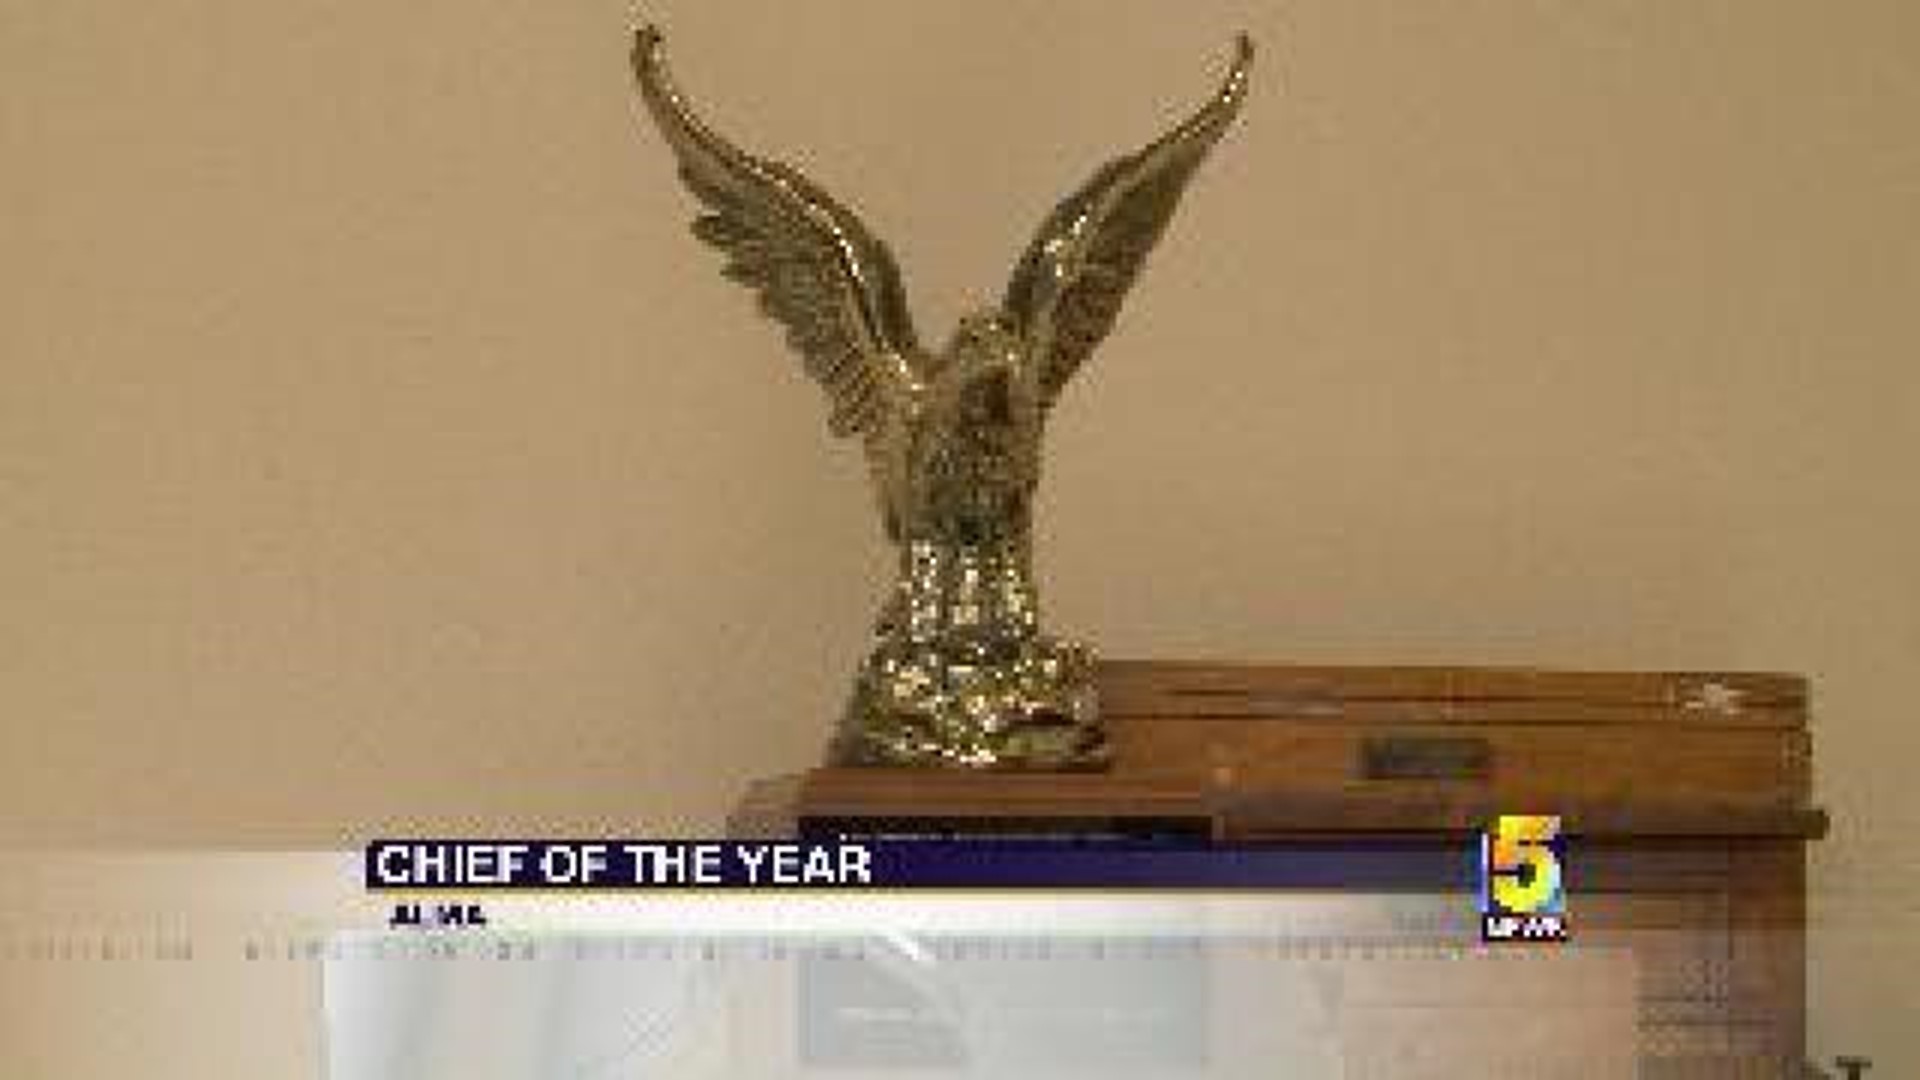 Alma Police Chief Named “Chief of the Year”